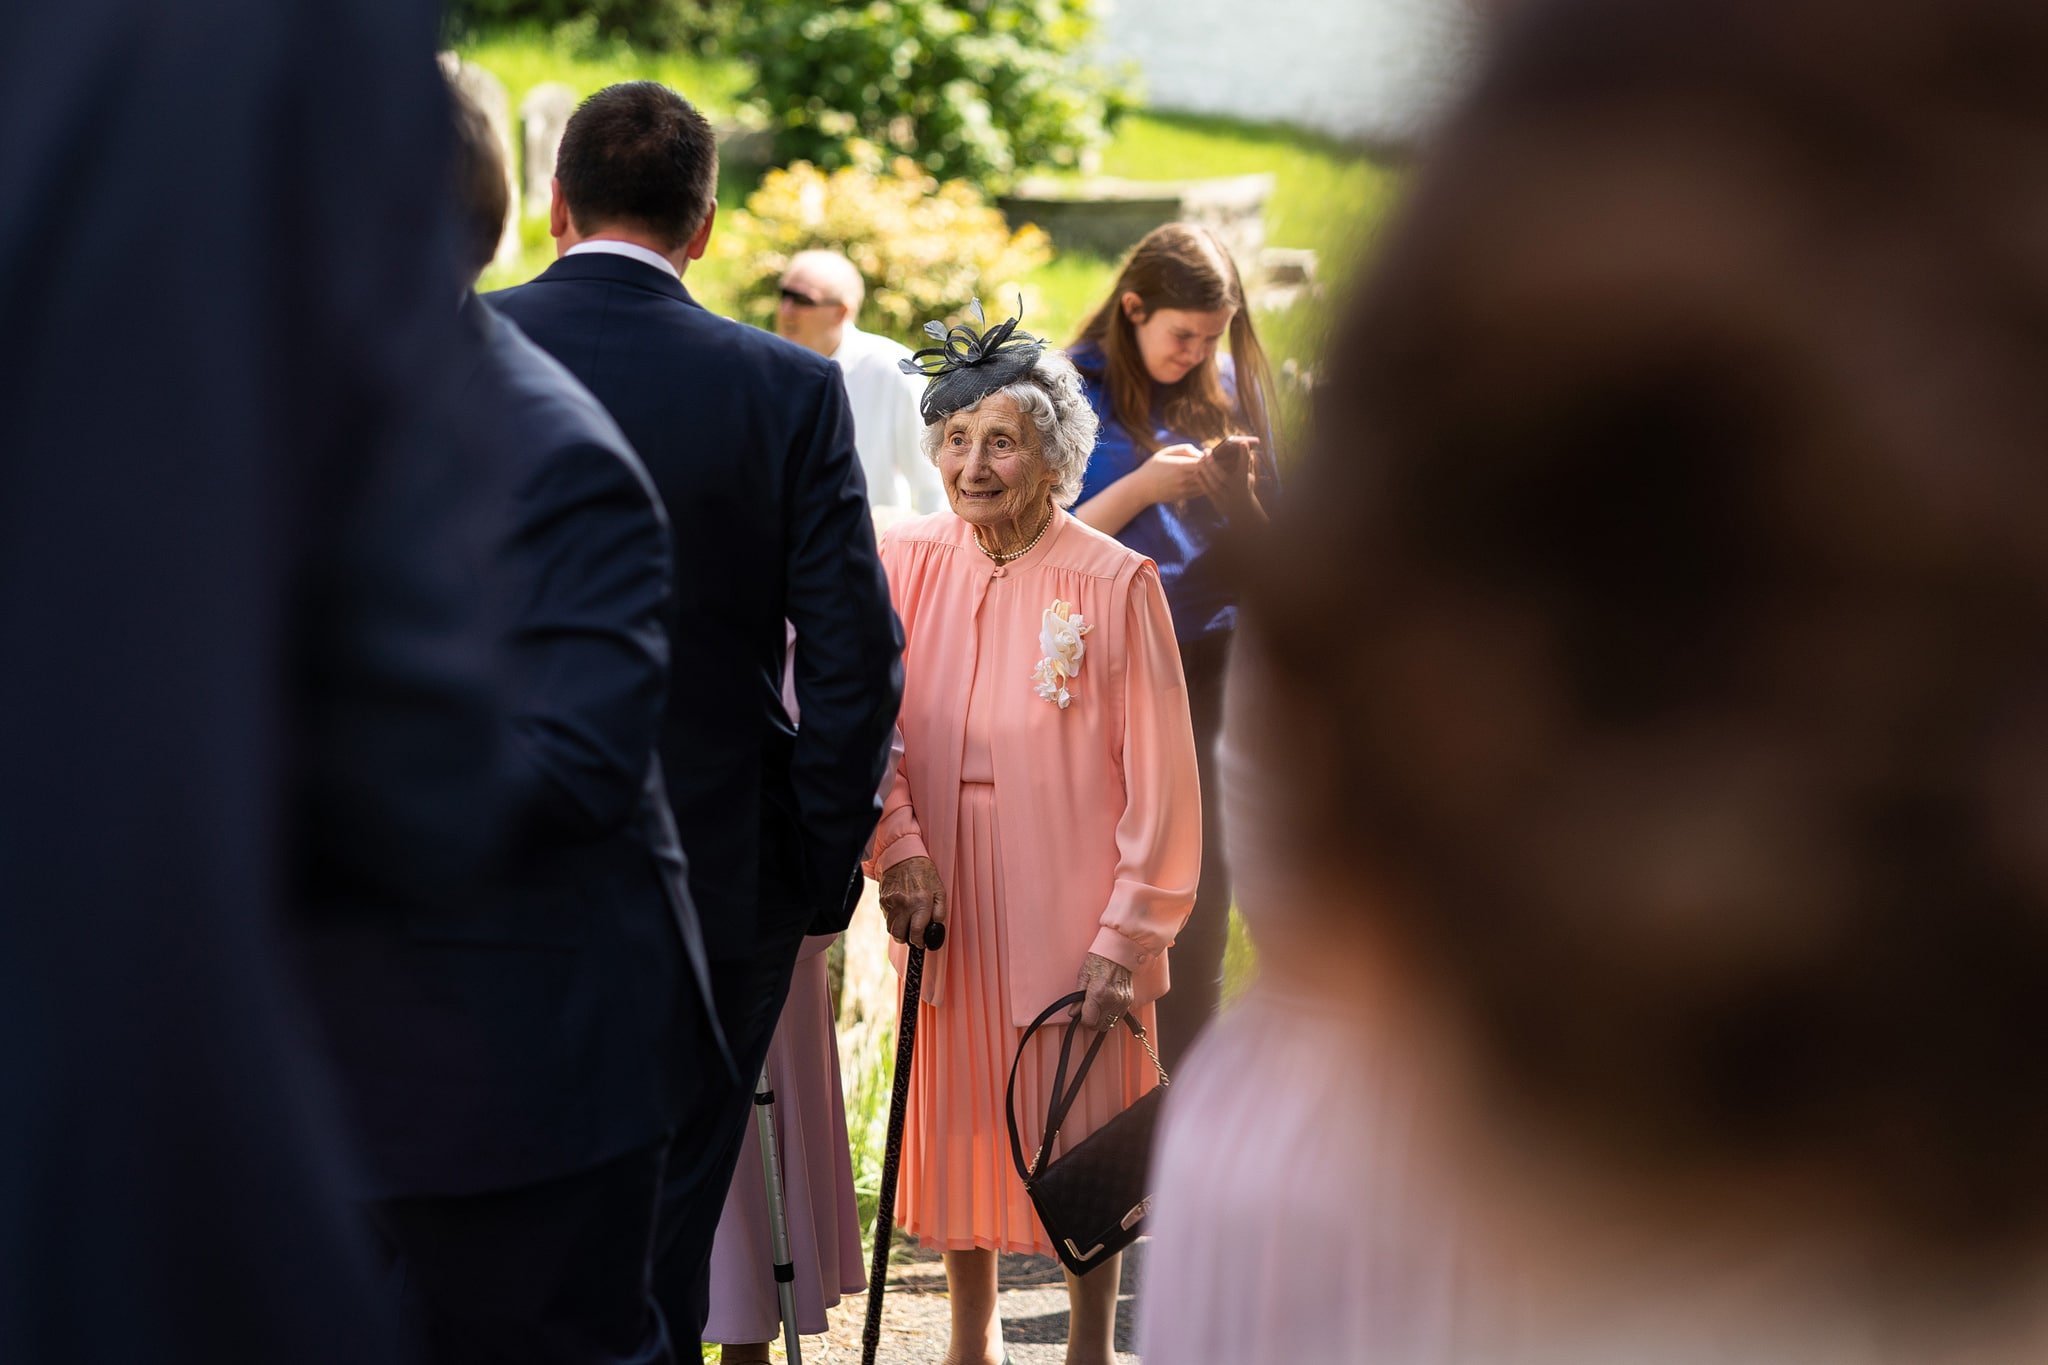 Gran standing with guests outside church